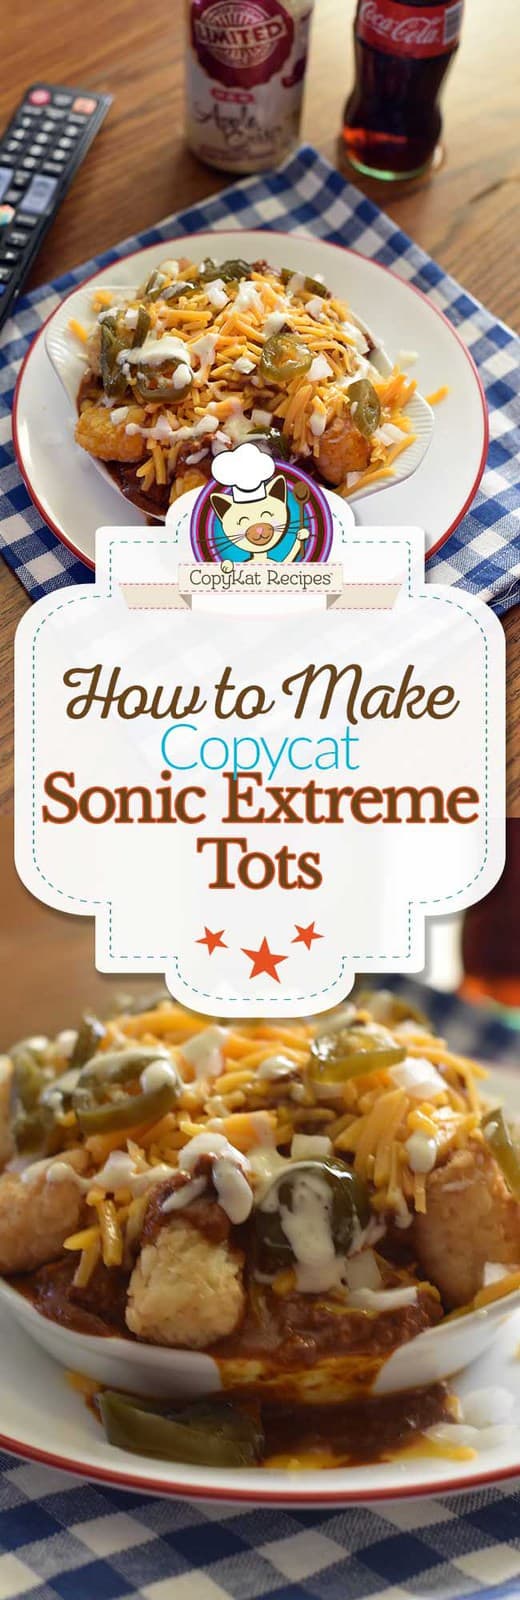 Sonic Extreme Chili Cheese Tots Copykat Recipes